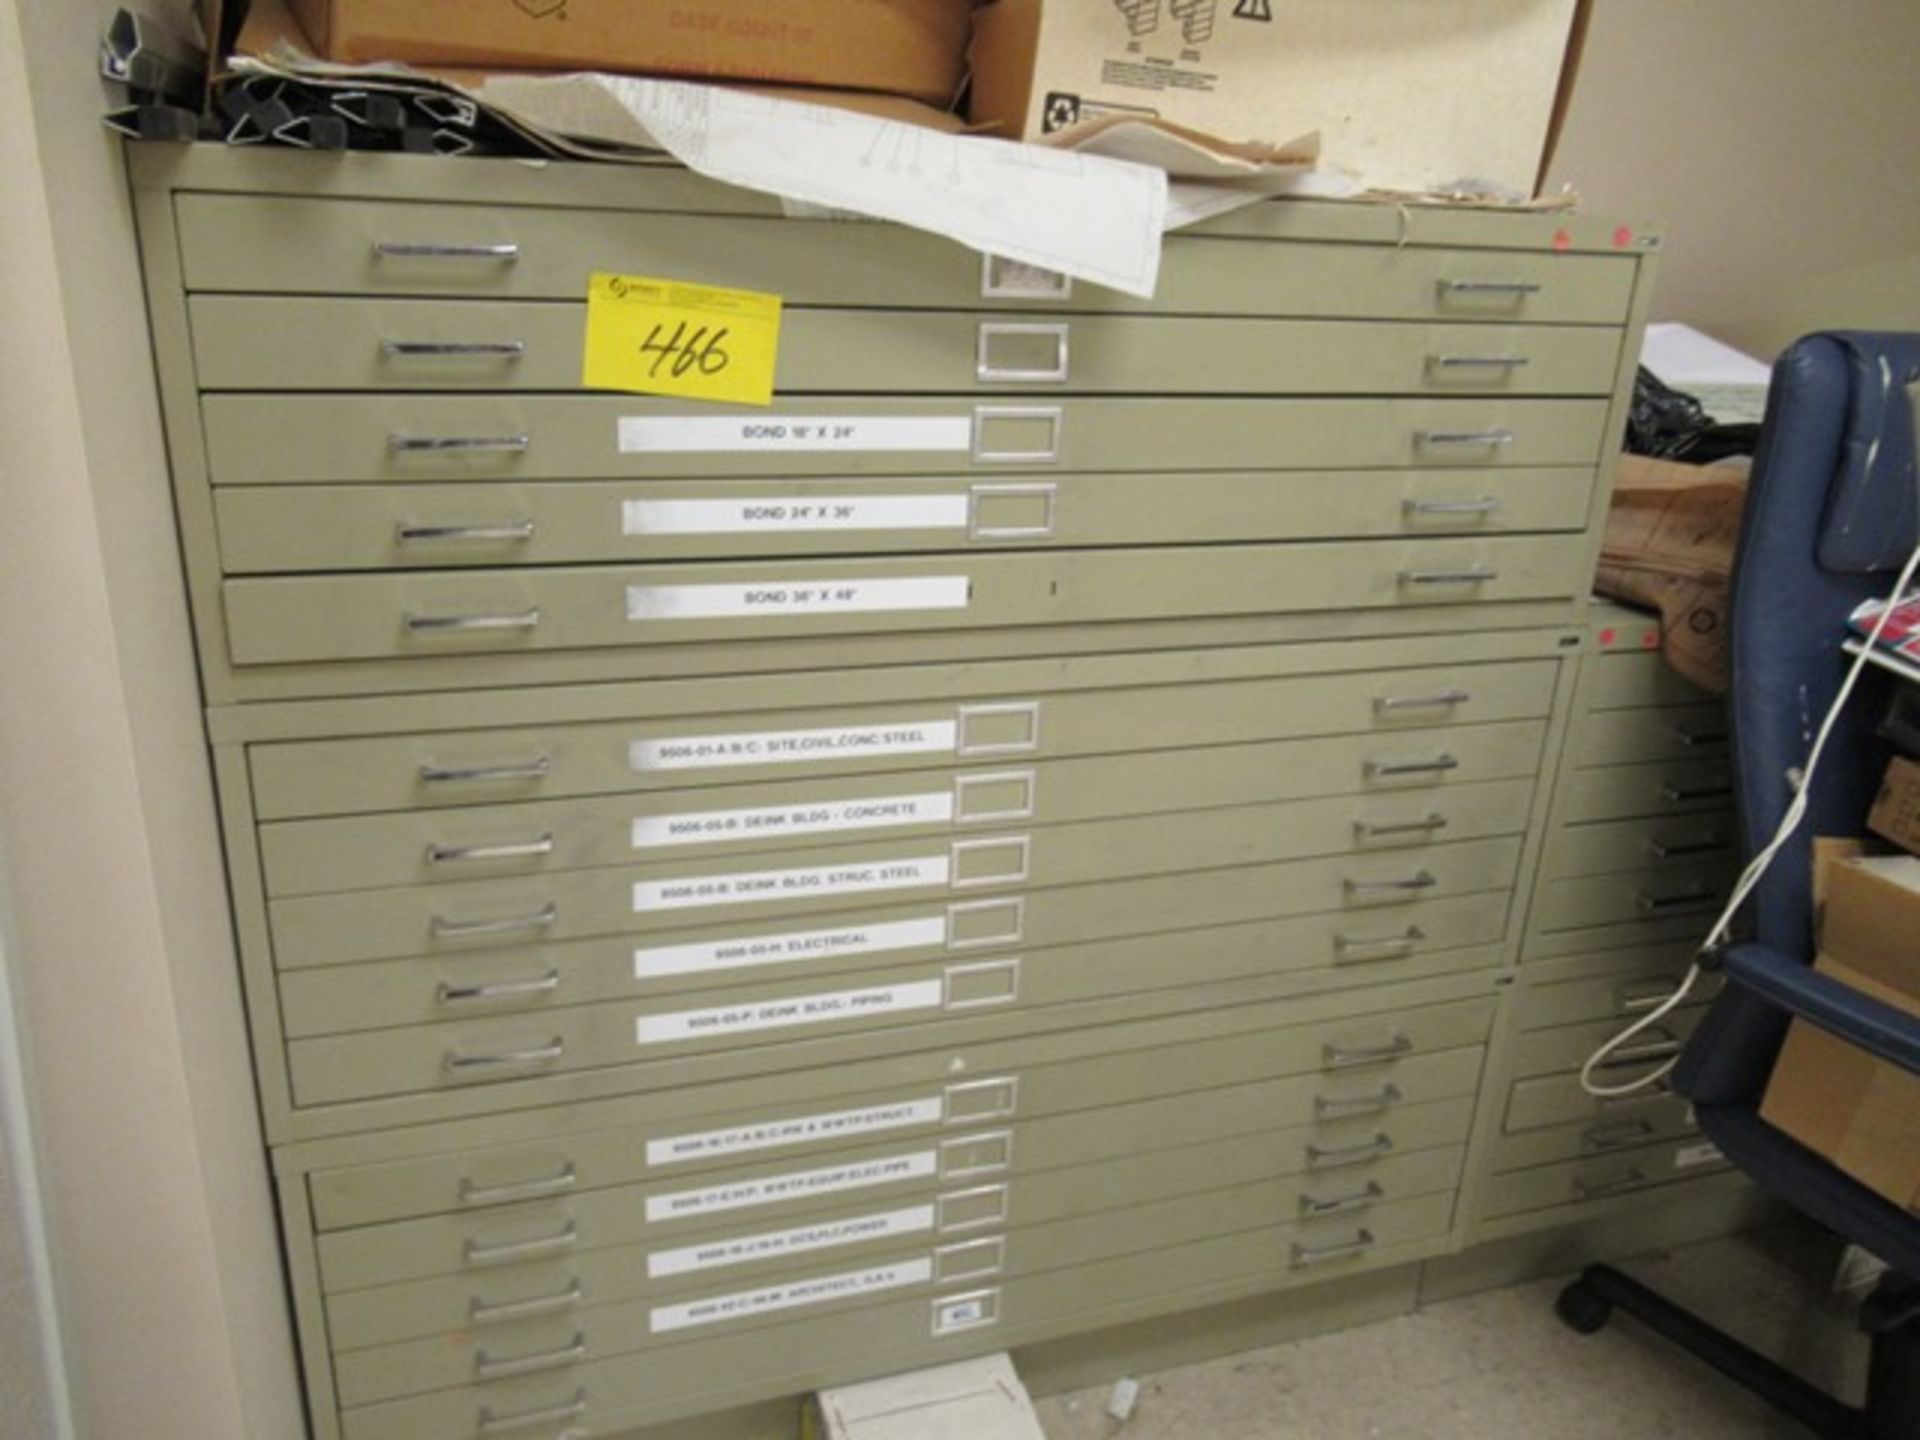 LOT ASST. OFFICE FURNITURE, BLUE PRINT COPIER, FILE CABINETS, CHAIRS, ETC. (MO2NDF)